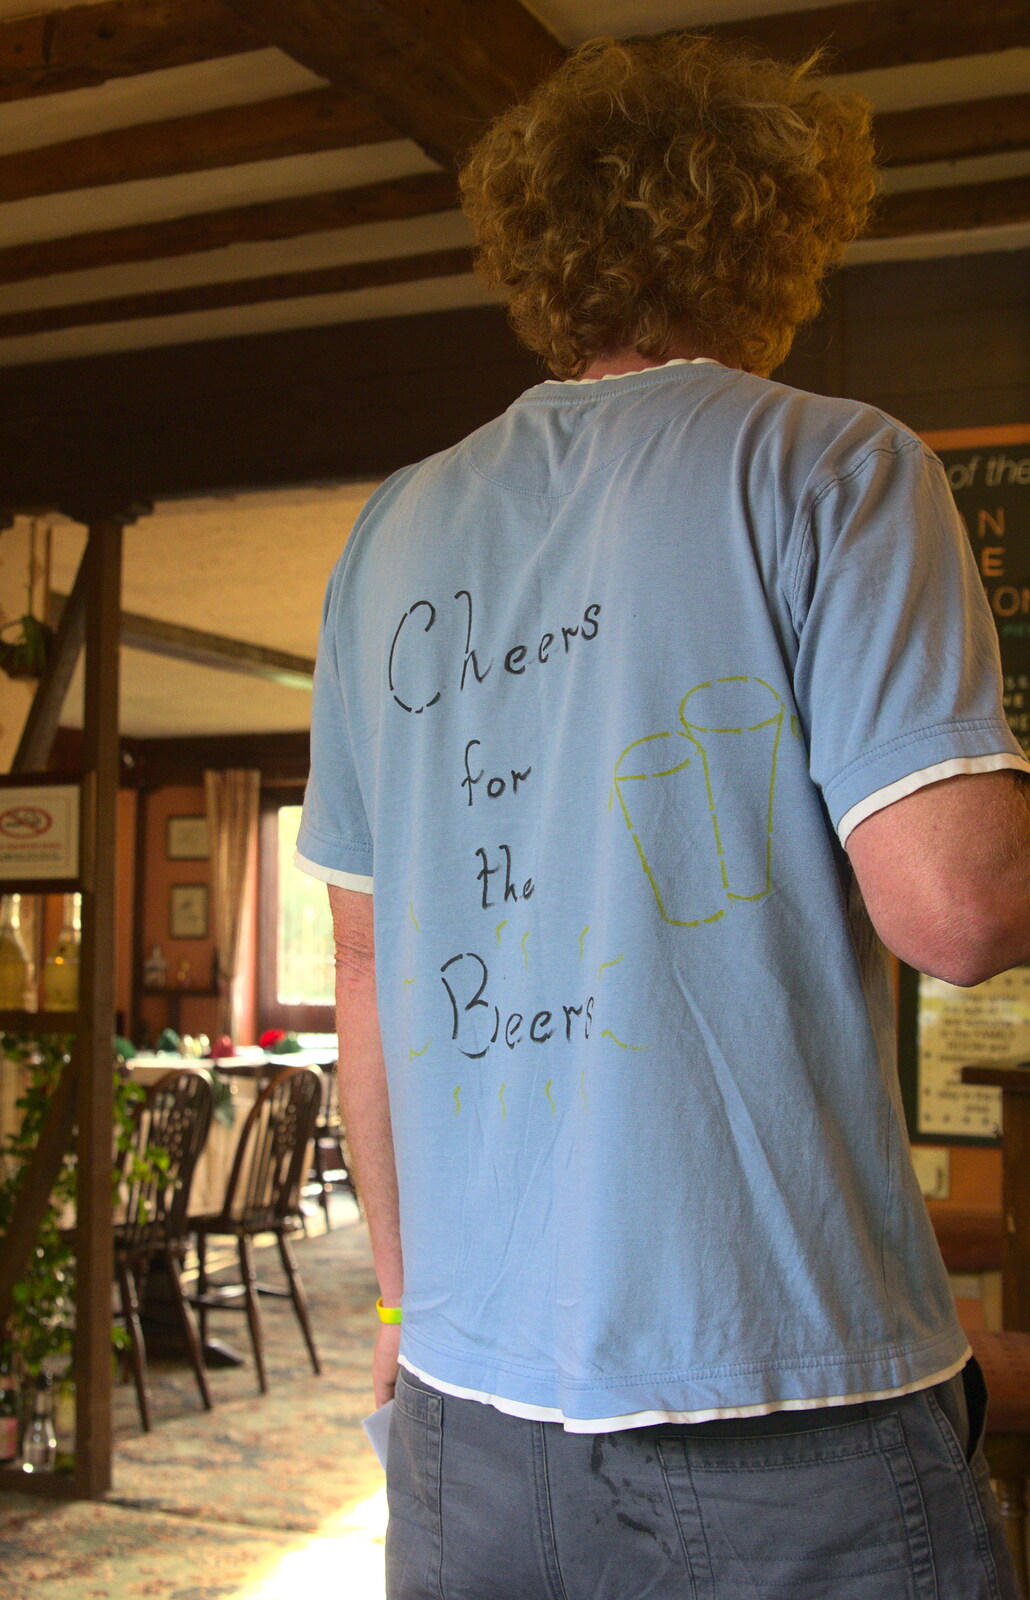 Wavy's home-made teeshirt from A Retirement: The Last Night of The Swan Inn, Brome, Suffolk - 3rd June 2017